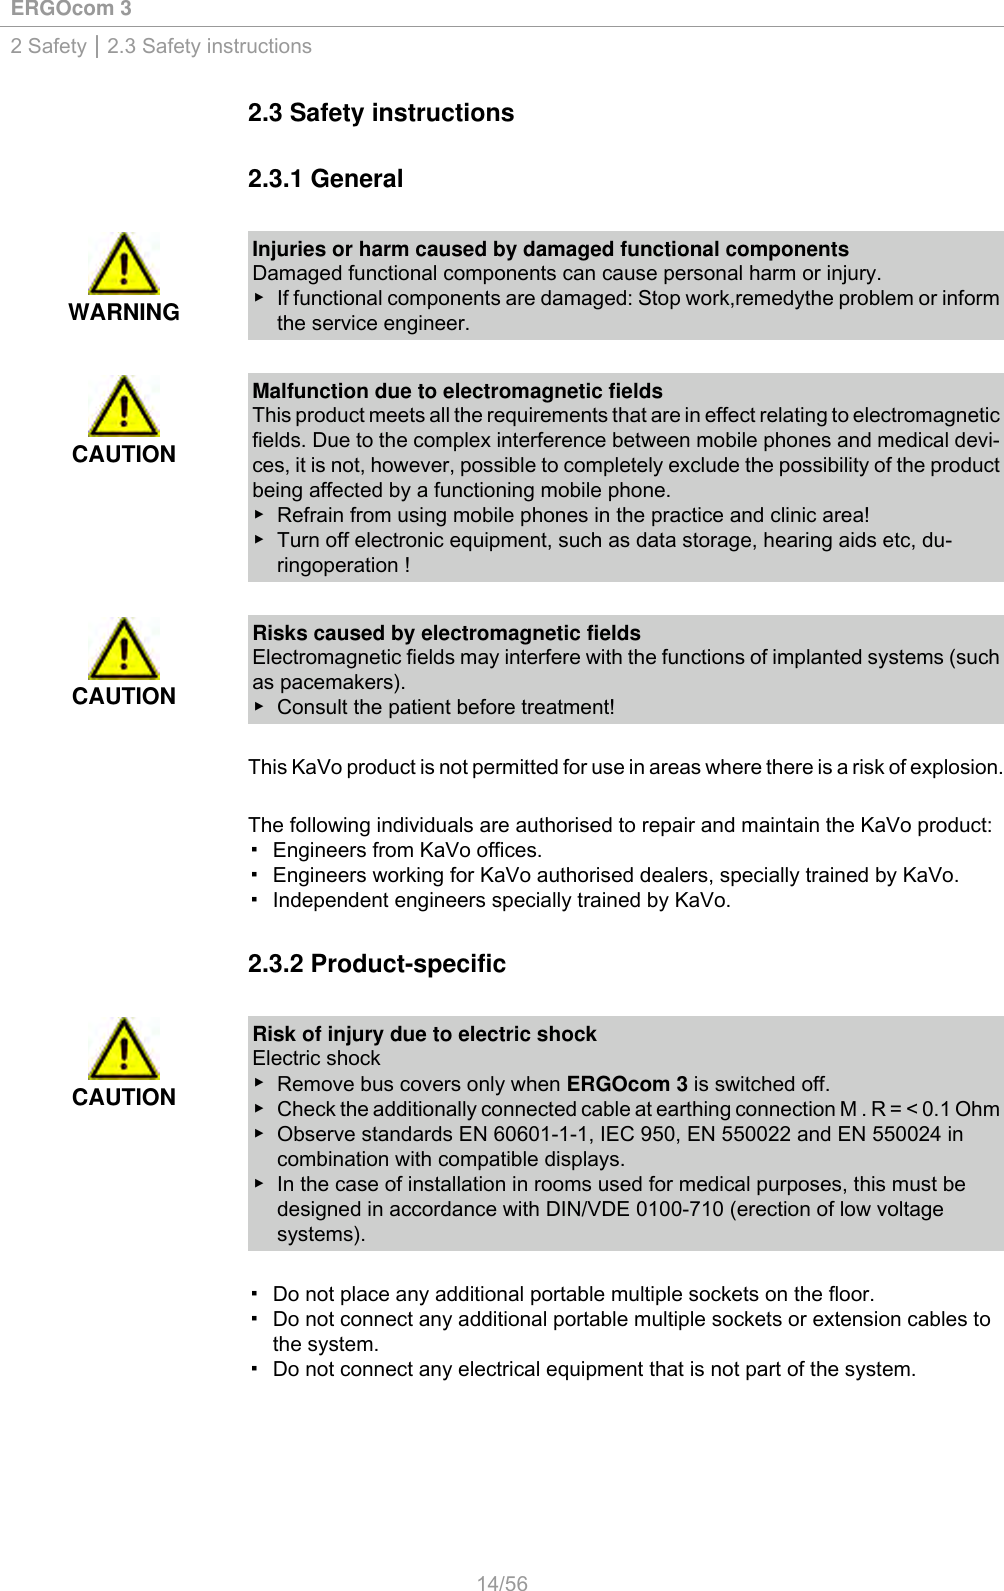 ERGOcom 32 Safety | 2.3 Safety instructions2.3 Safety instructions2.3.1 GeneralWARNINGInjuries or harm caused by damaged functional componentsDamaged functional components can cause personal harm or injury.▶ If functional components are damaged: Stop work,remedythe problem or informthe service engineer.CAUTIONMalfunction due to electromagnetic fieldsThis product meets all the requirements that are in effect relating to electromagneticfields. Due to the complex interference between mobile phones and medical devi-ces, it is not, however, possible to completely exclude the possibility of the productbeing affected by a functioning mobile phone.▶ Refrain from using mobile phones in the practice and clinic area!▶ Turn off electronic equipment, such as data storage, hearing aids etc, du-ringoperation !CAUTIONRisks caused by electromagnetic fieldsElectromagnetic fields may interfere with the functions of implanted systems (suchas pacemakers).▶ Consult the patient before treatment!This KaVo product is not permitted for use in areas where there is a risk of explosion.The following individuals are authorised to repair and maintain the KaVo product:▪ Engineers from KaVo offices.▪ Engineers working for KaVo authorised dealers, specially trained by KaVo.▪ Independent engineers specially trained by KaVo.2.3.2 Product-specificCAUTIONRisk of injury due to electric shockElectric shock▶Remove bus covers only when ERGOcom 3 is switched off.▶ Check the additionally connected cable at earthing connection M . R = &lt; 0.1 Ohm▶ Observe standards EN 60601-1-1, IEC 950, EN 550022 and EN 550024 incombination with compatible displays.▶ In the case of installation in rooms used for medical purposes, this must bedesigned in accordance with DIN/VDE 0100-710 (erection of low voltagesystems).▪ Do not place any additional portable multiple sockets on the floor.▪ Do not connect any additional portable multiple sockets or extension cables tothe system.▪ Do not connect any electrical equipment that is not part of the system.14/56